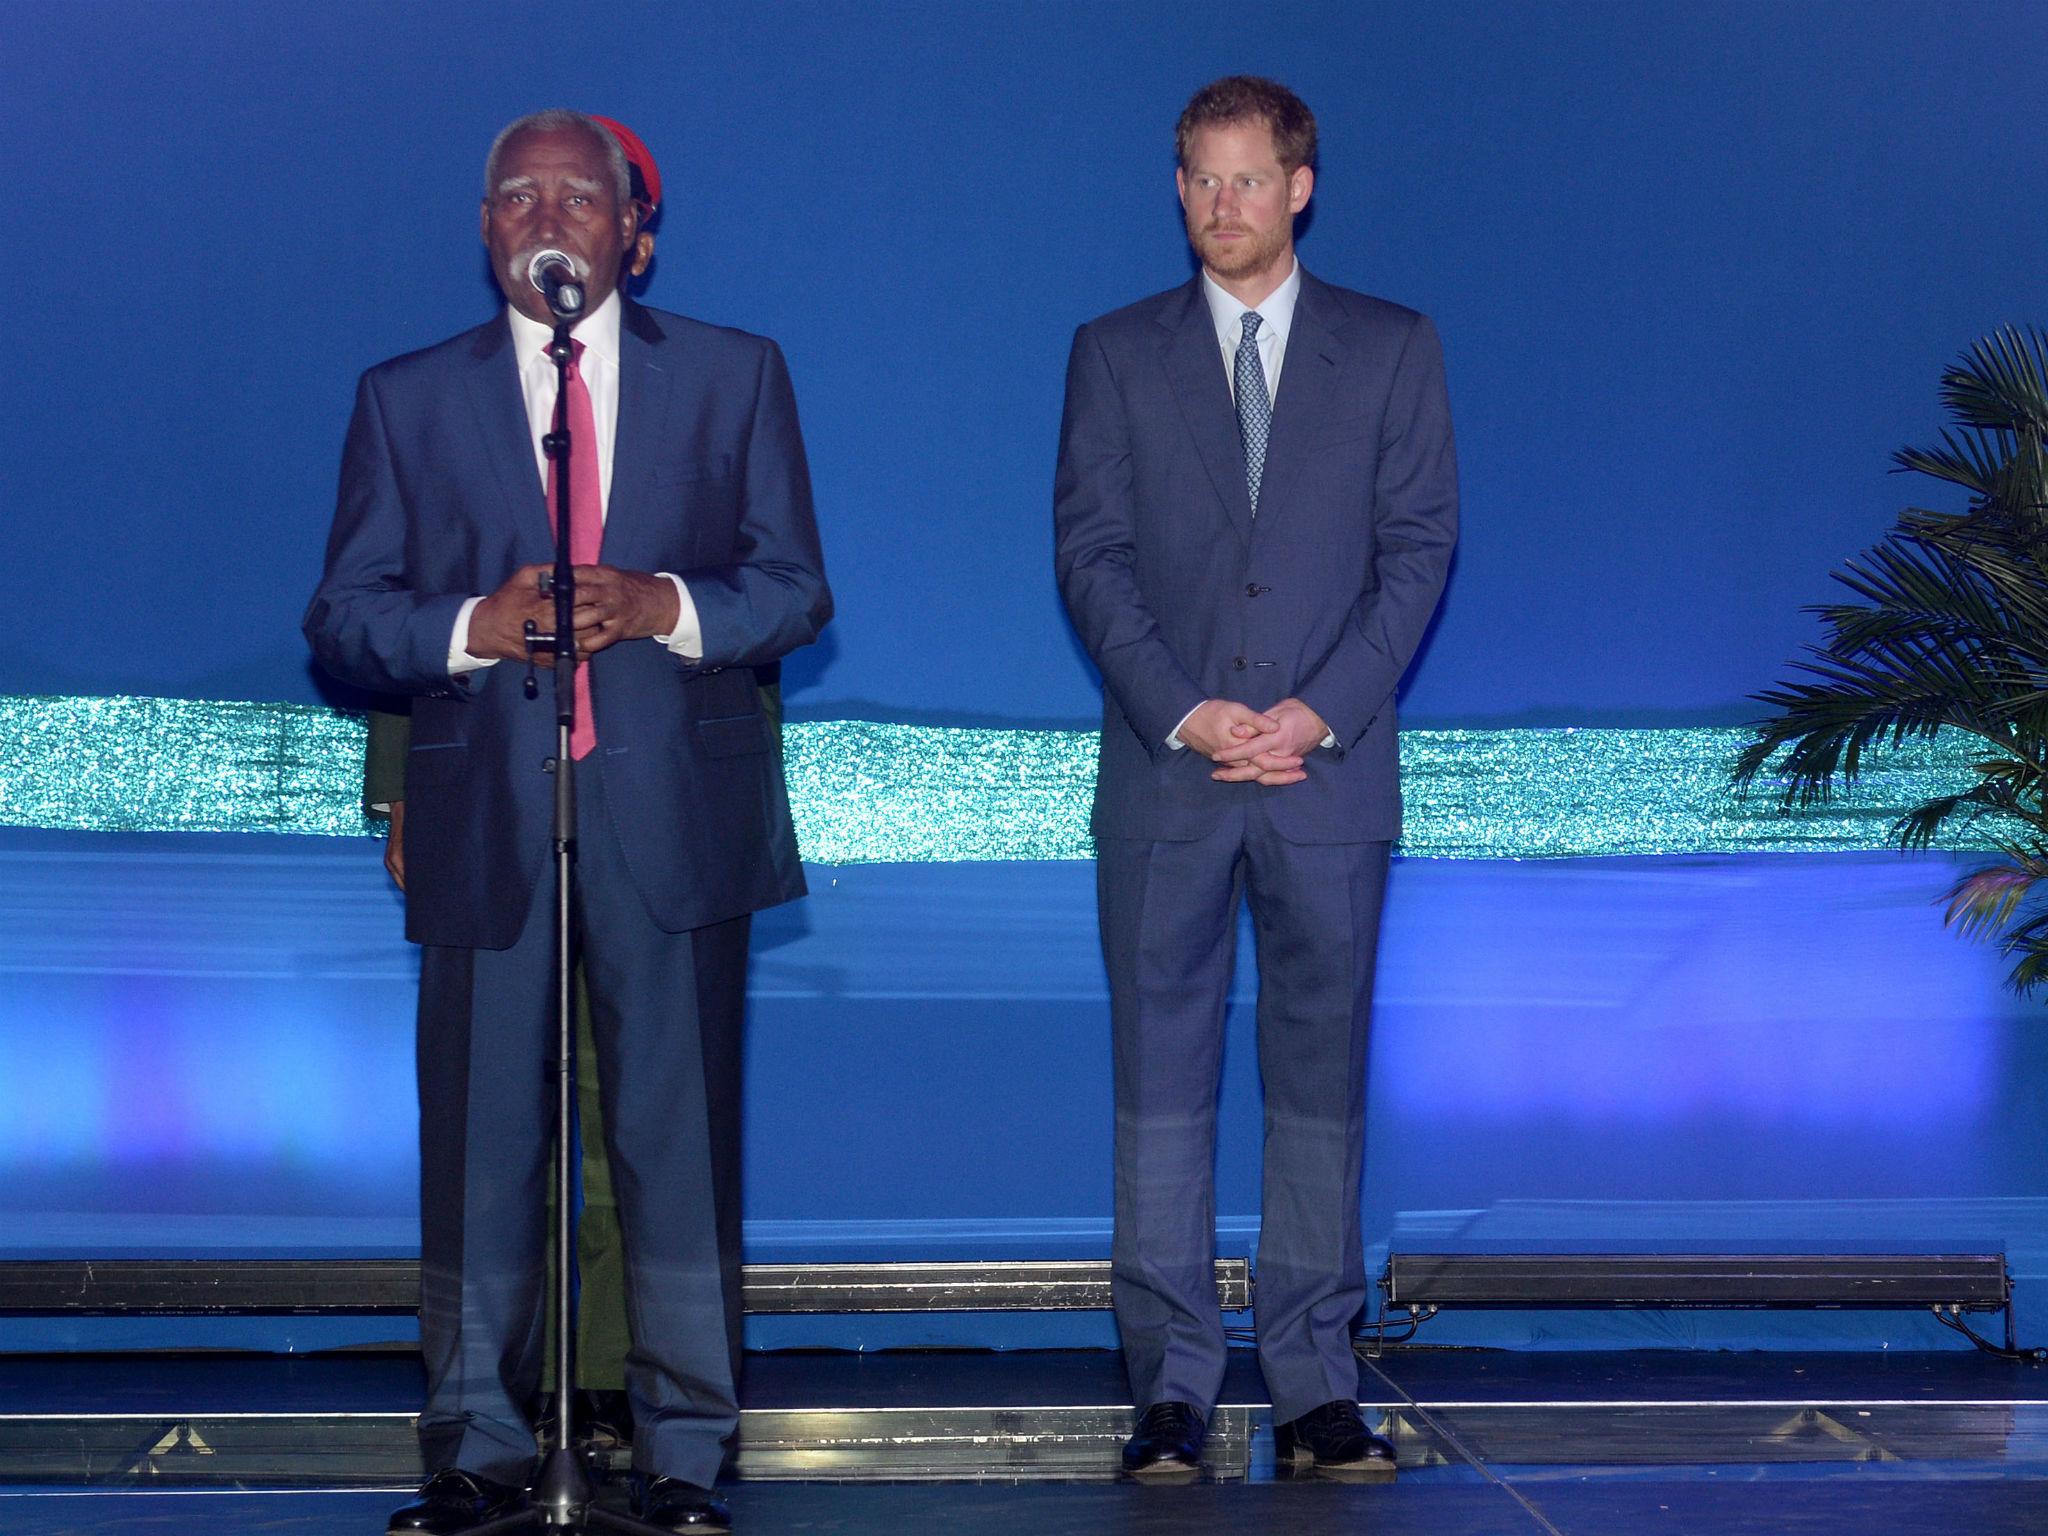 Prince Harry takes part in a 'marked silence' to mark the death of Cuban leader Fidel Castro as he attends a reception on the island of St Vincent and the Grenadines